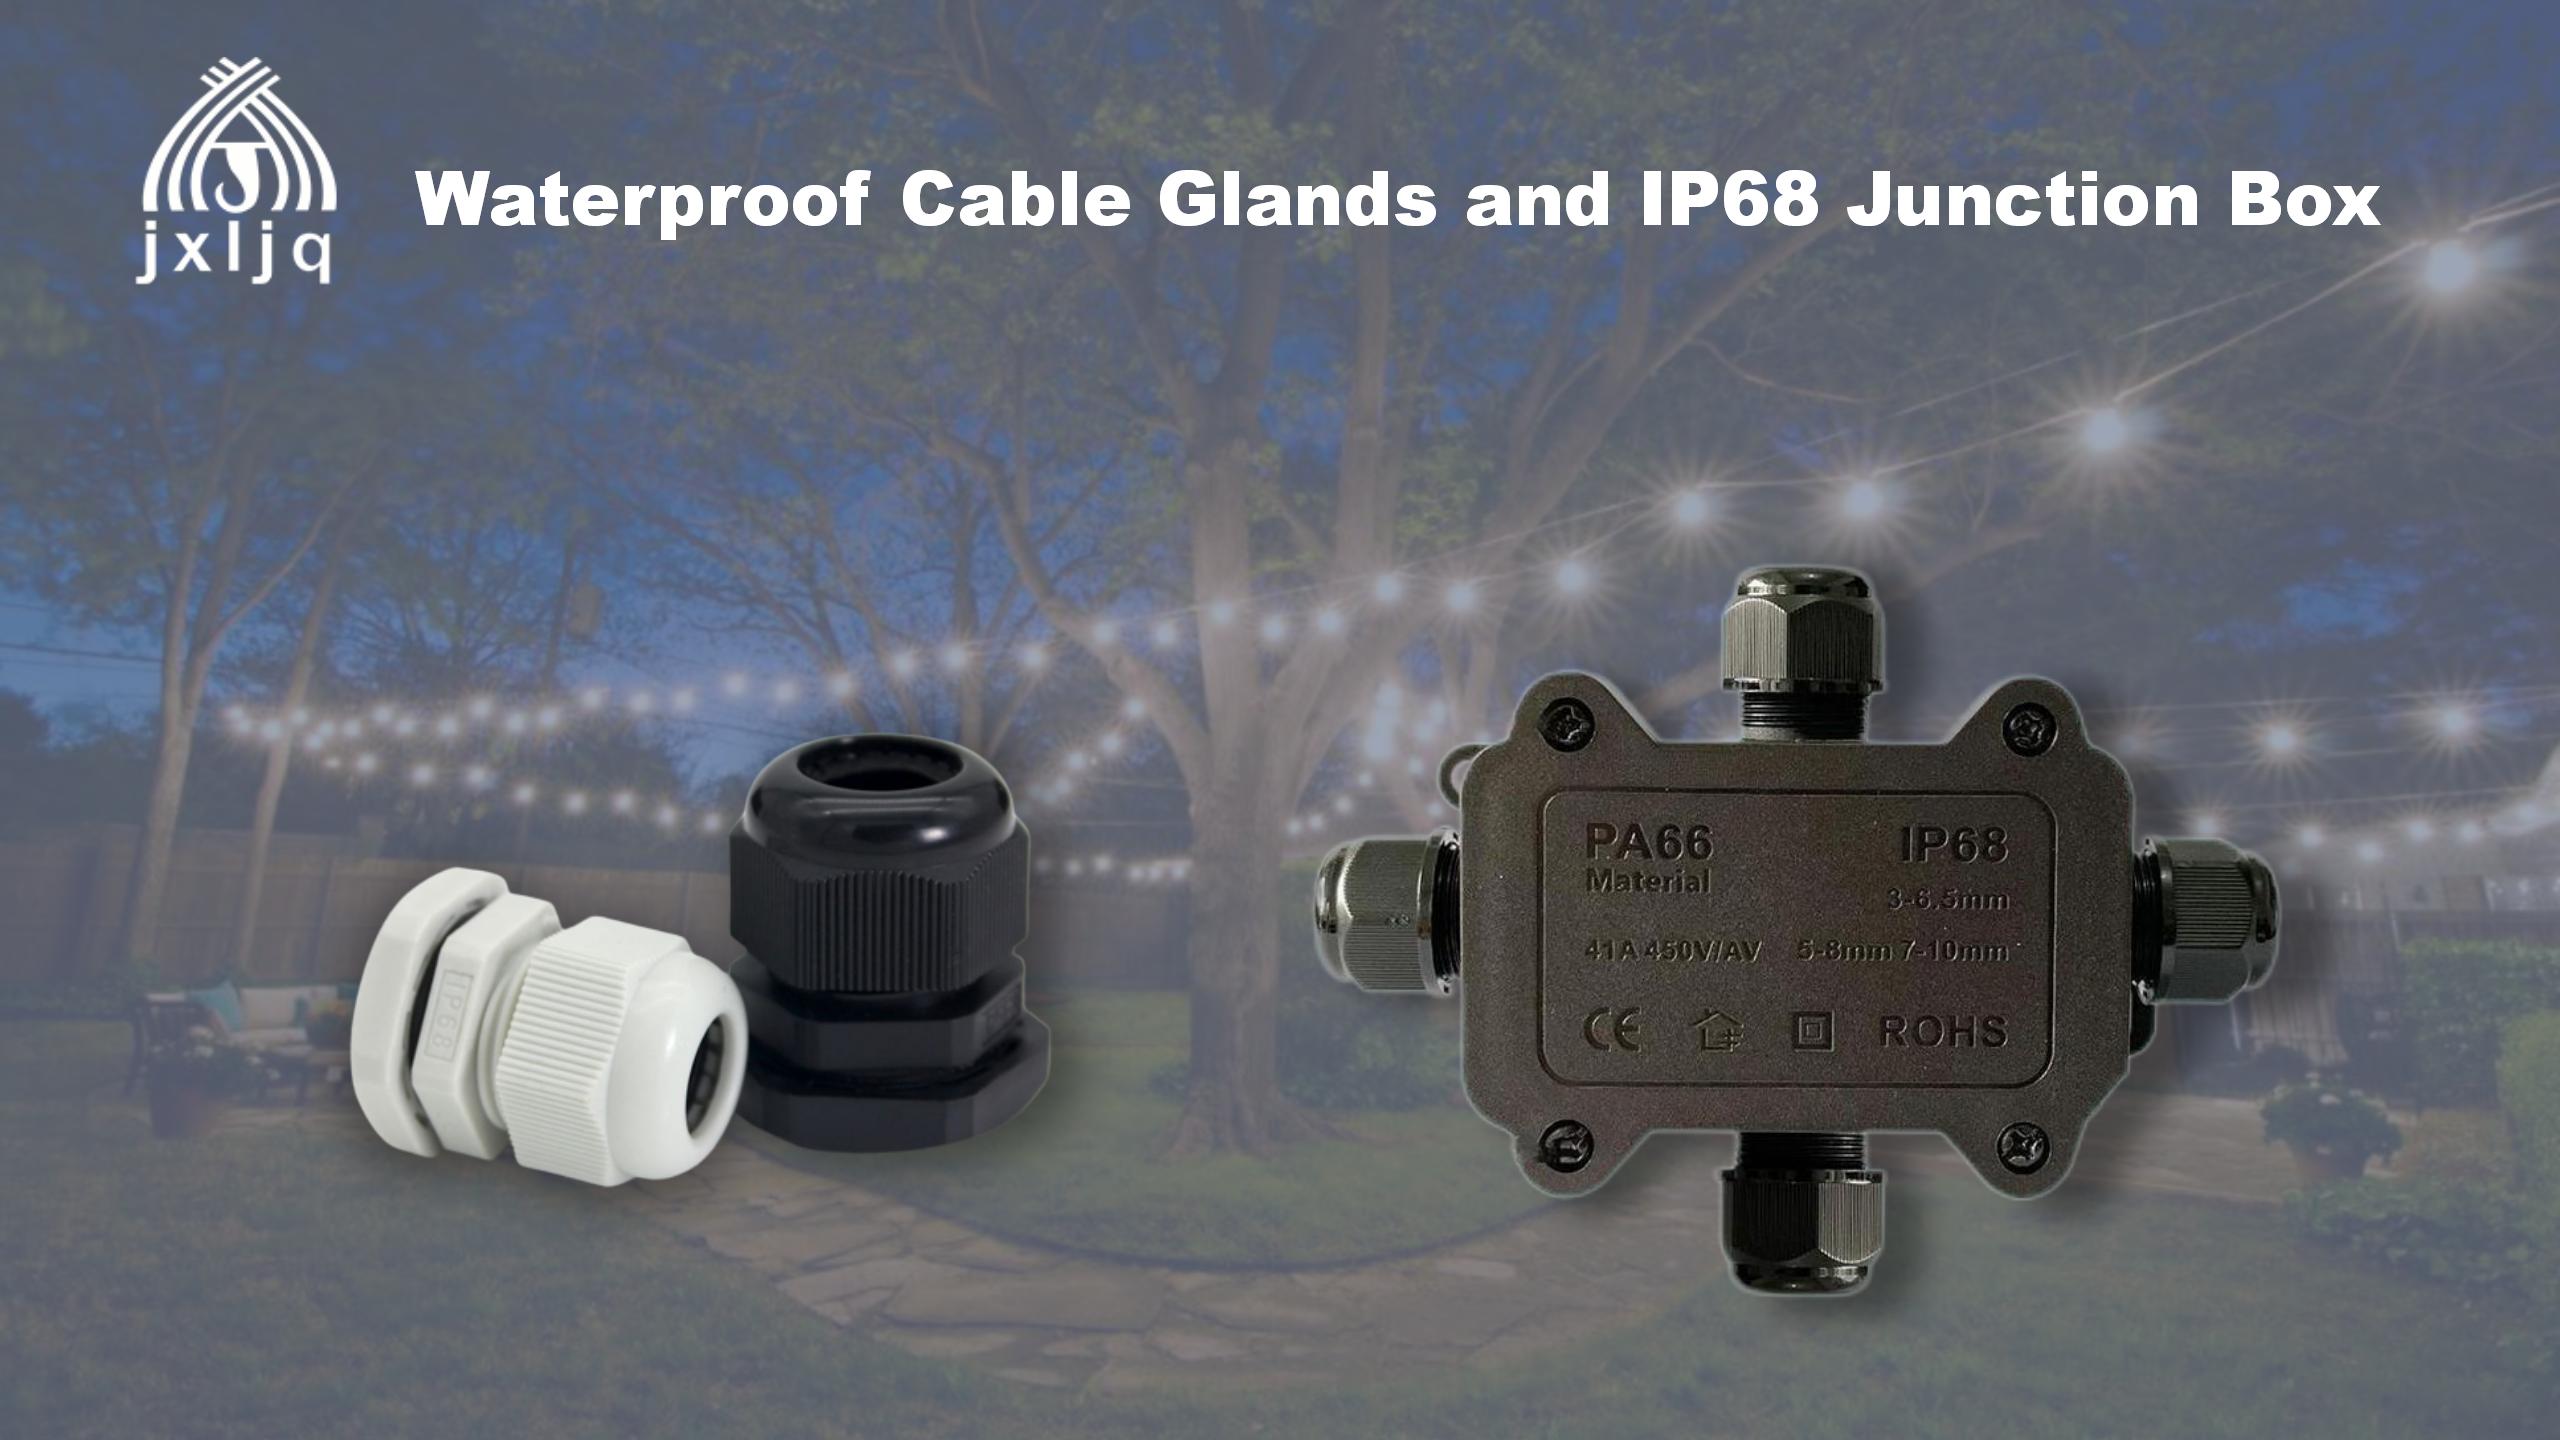 Waterproof Cable Glands and IP68 Junction Box for Outdoor Wiring